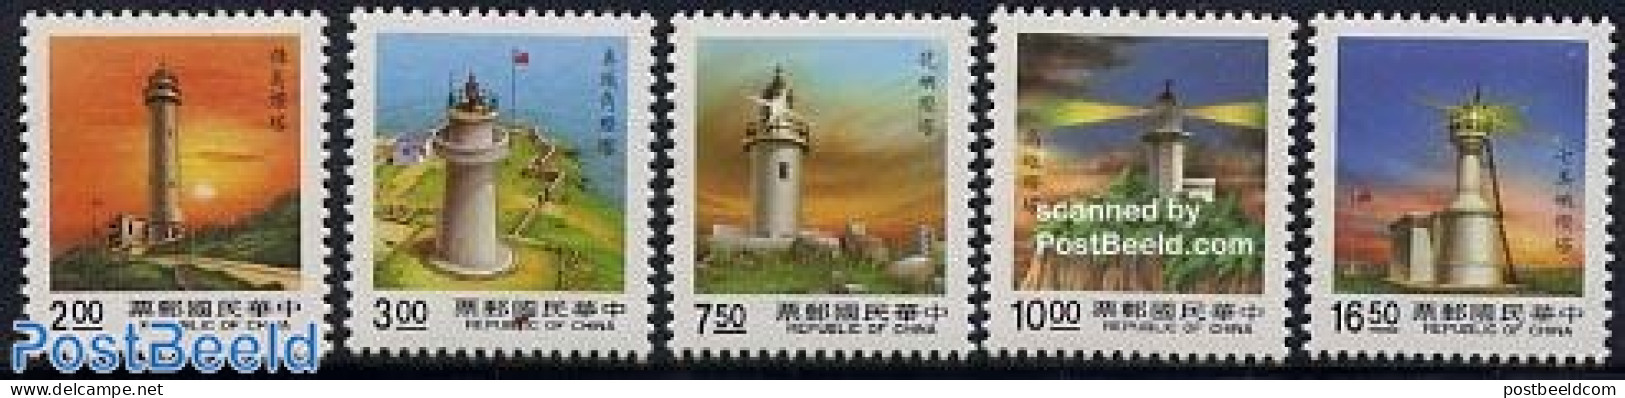 Taiwan 1991 Lighthouses 5v, Mint NH, Various - Lighthouses & Safety At Sea - Faros